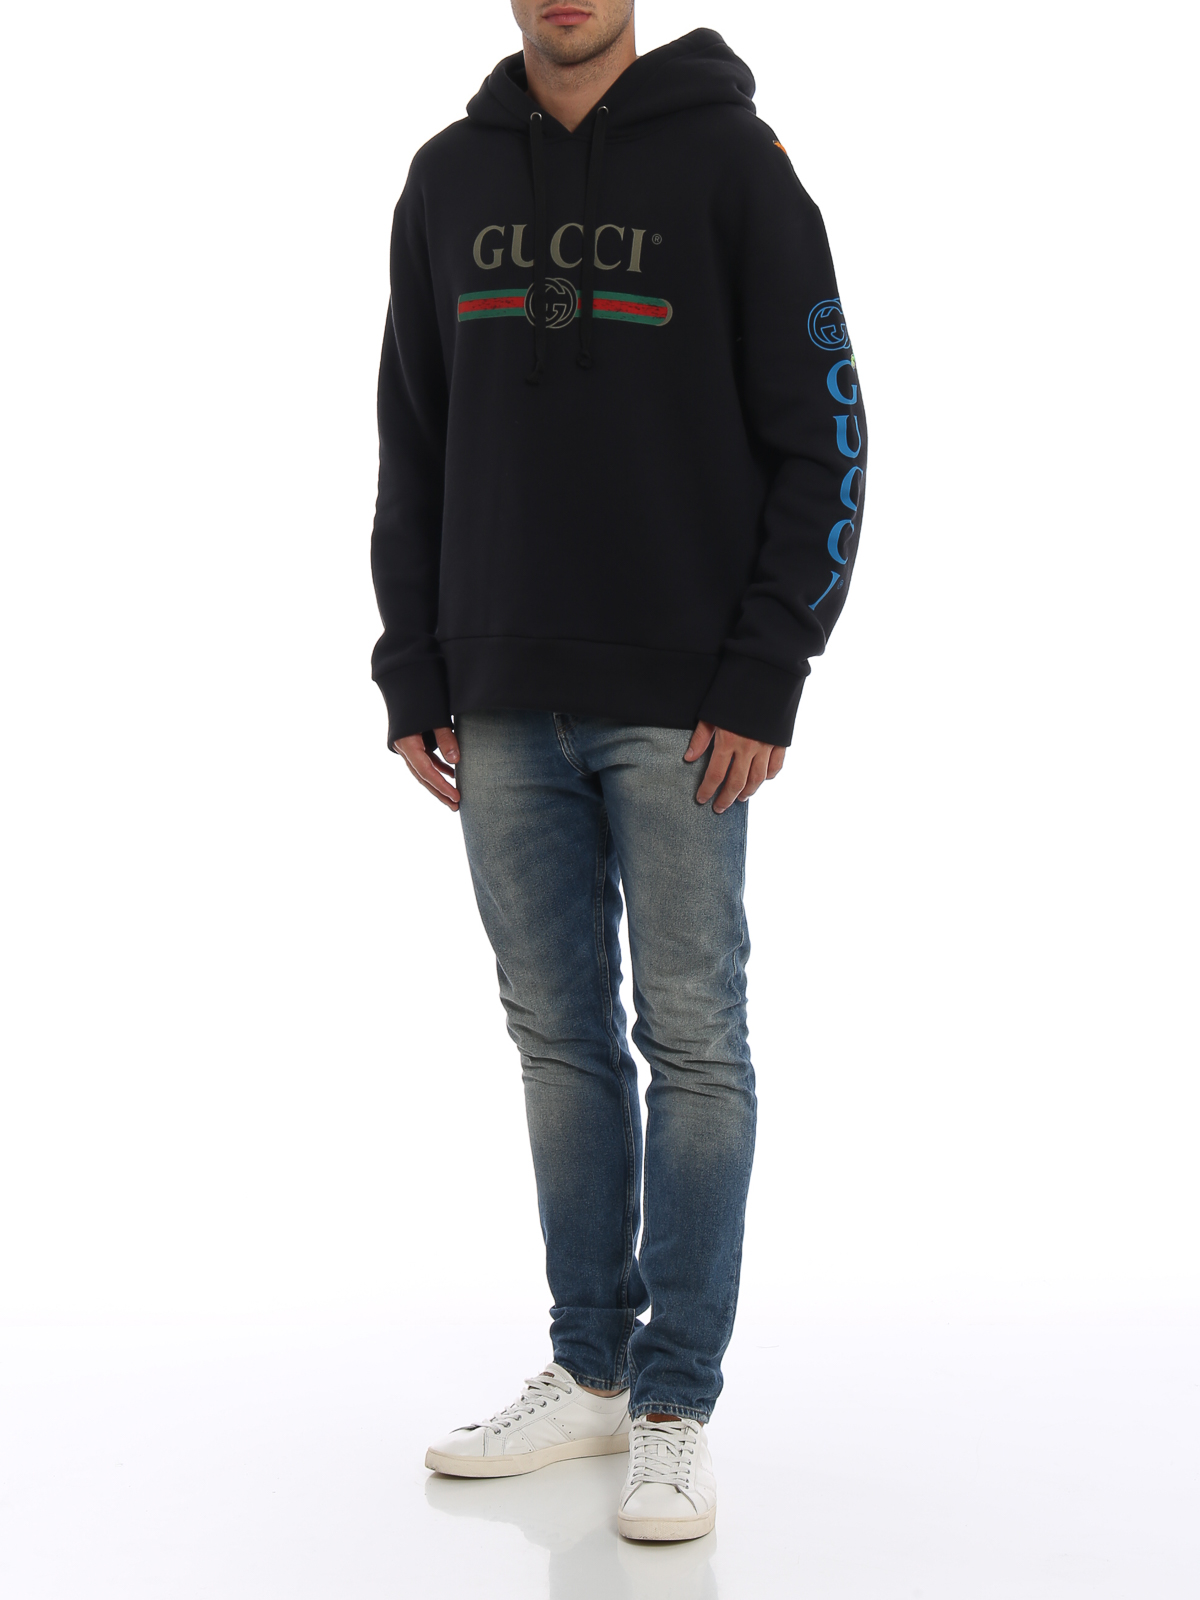 klap lejlighed Due Sweatshirts & Sweaters Gucci - Embroidered dragon blue cotton hoodie -  475374X9V461286